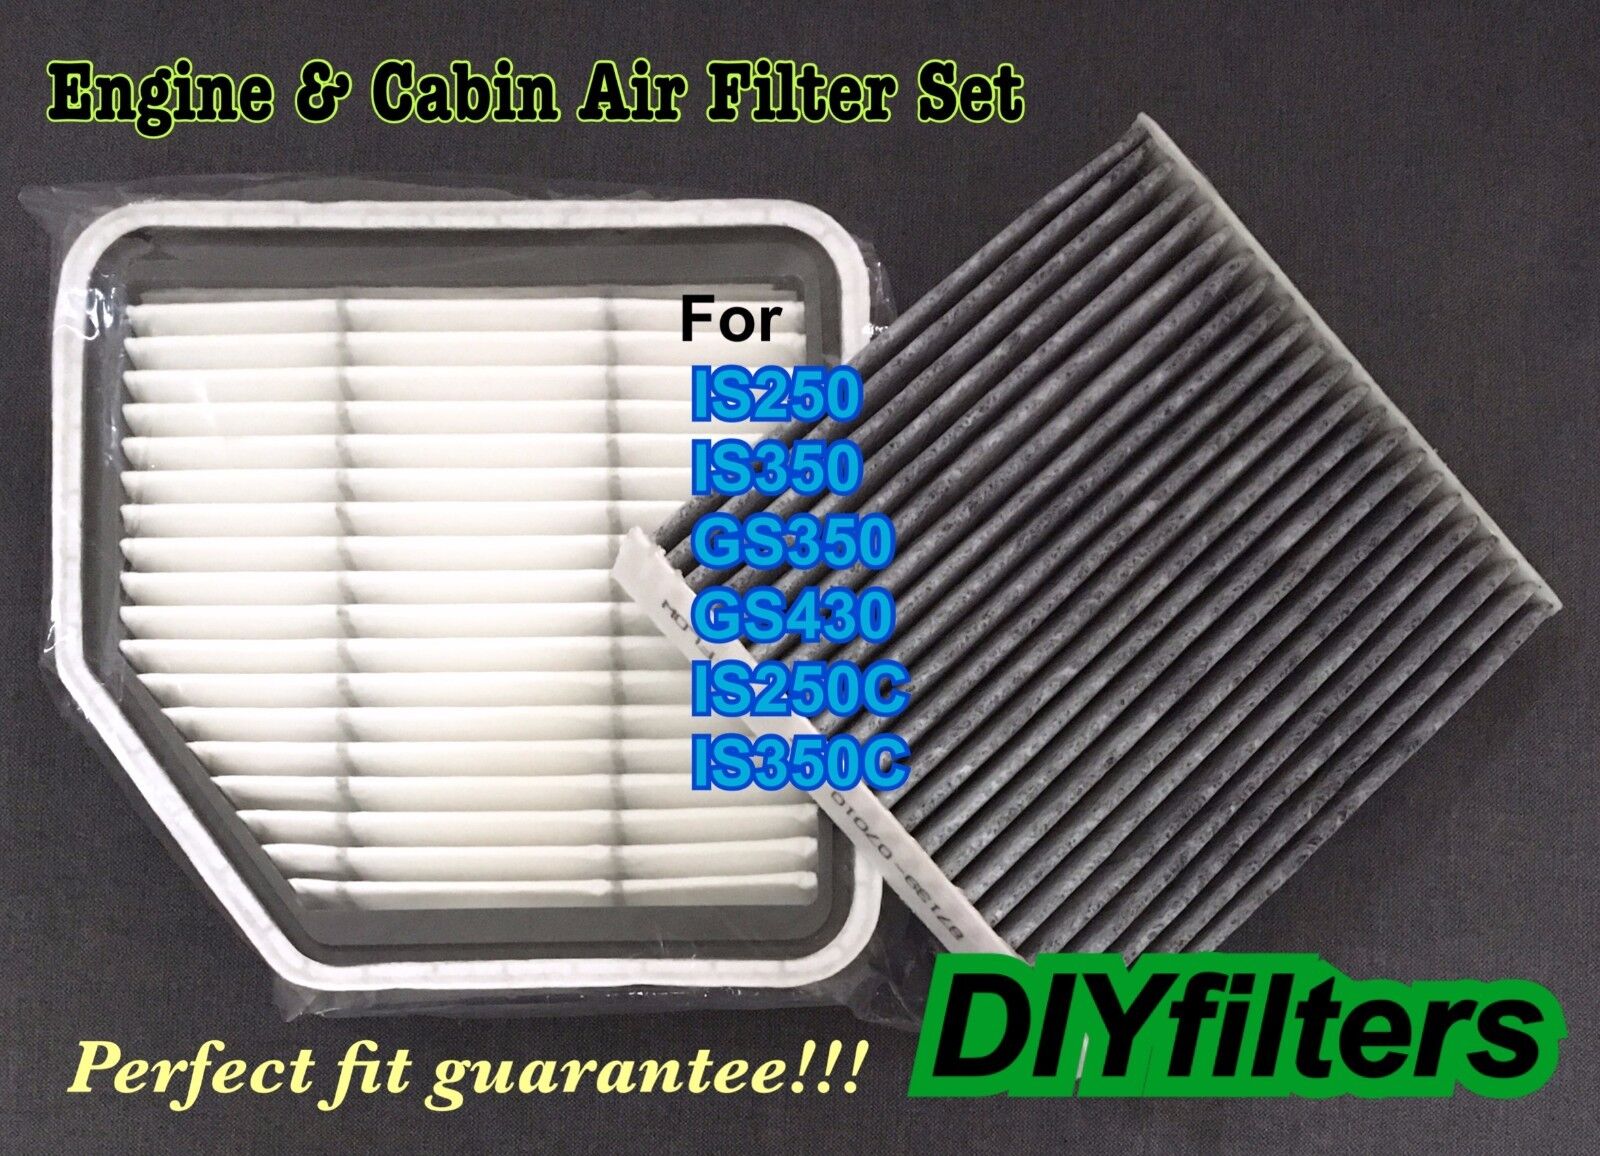 Engine & Carbonized Cabin Air Filter For IS250 IS350 GS350 GS430 IS250C IS350C 